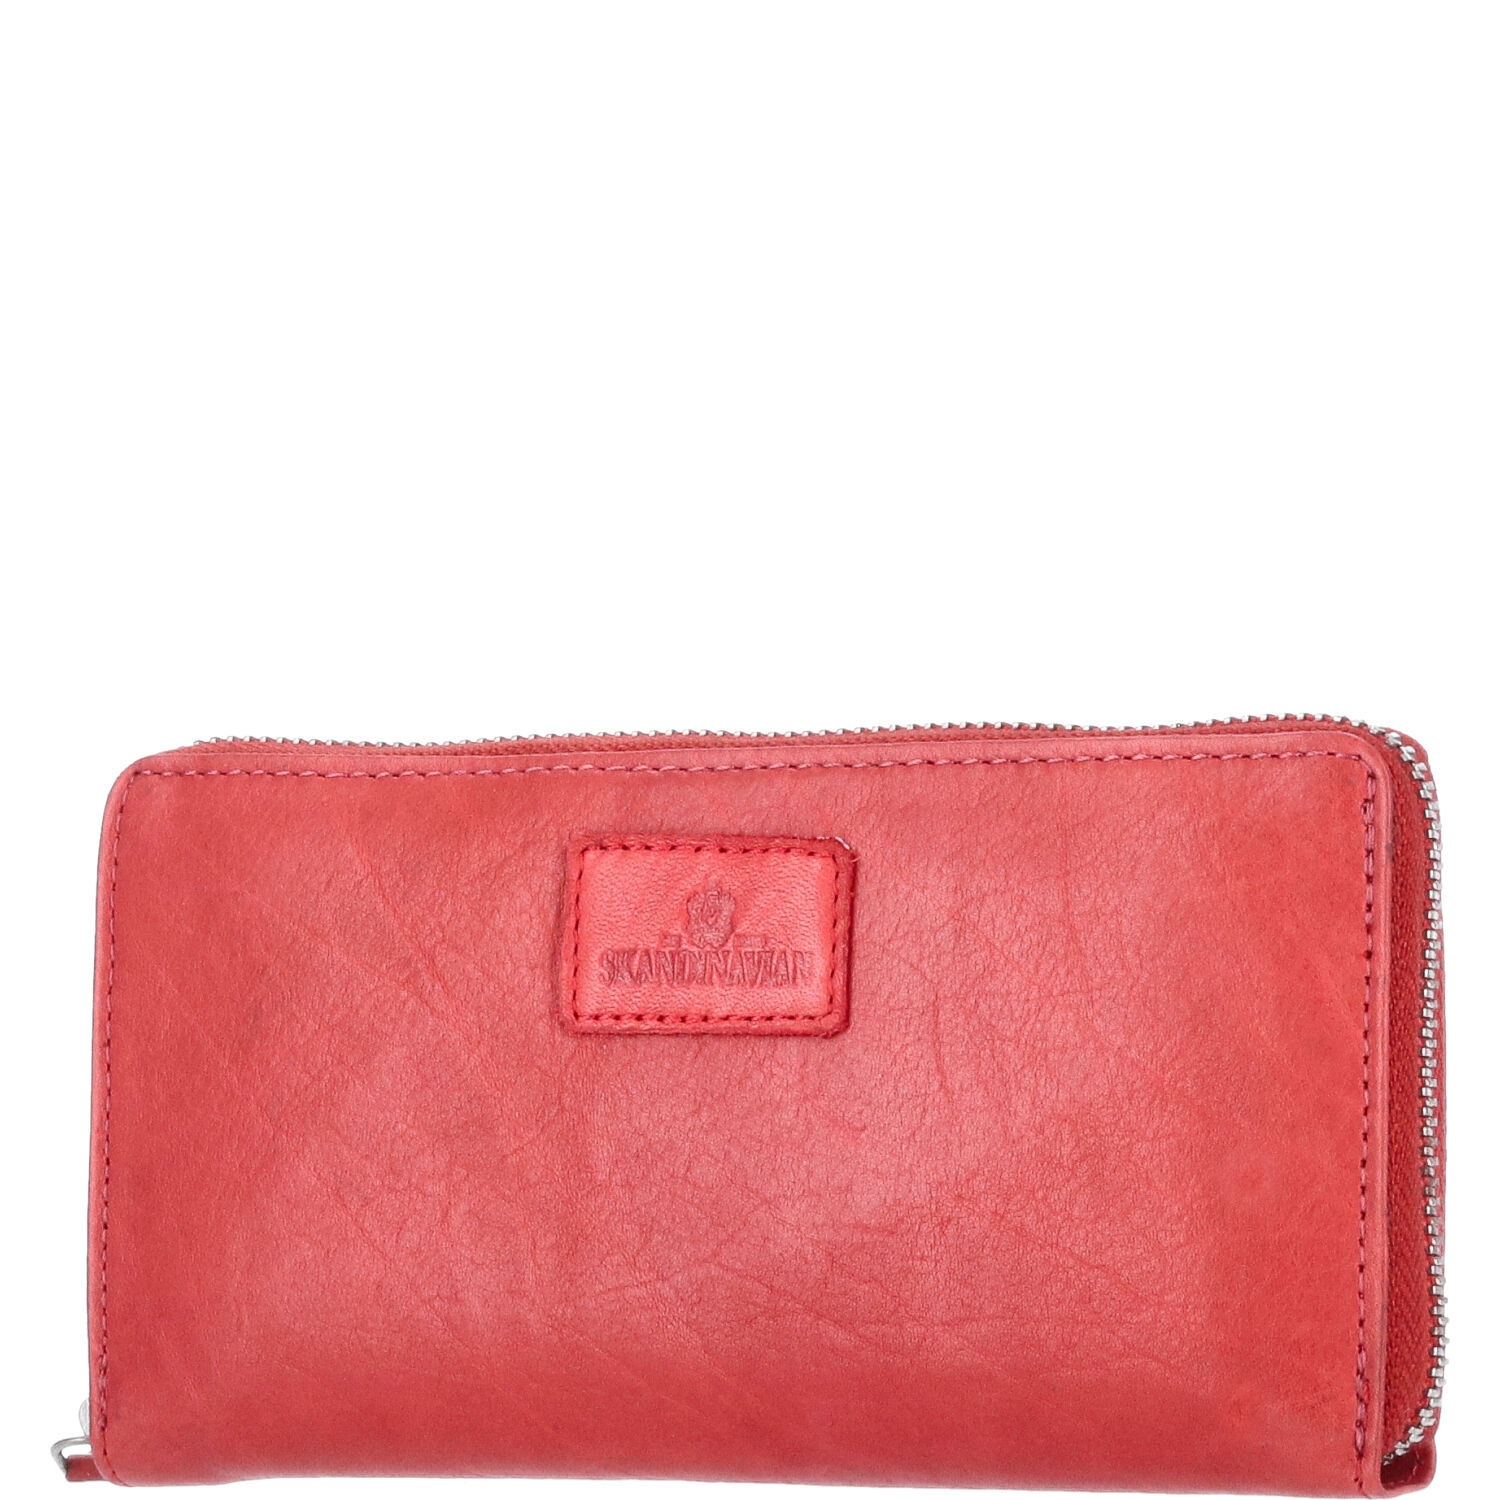 The Skandinavian Brand Lady Zip Wallet Washed Leather rot